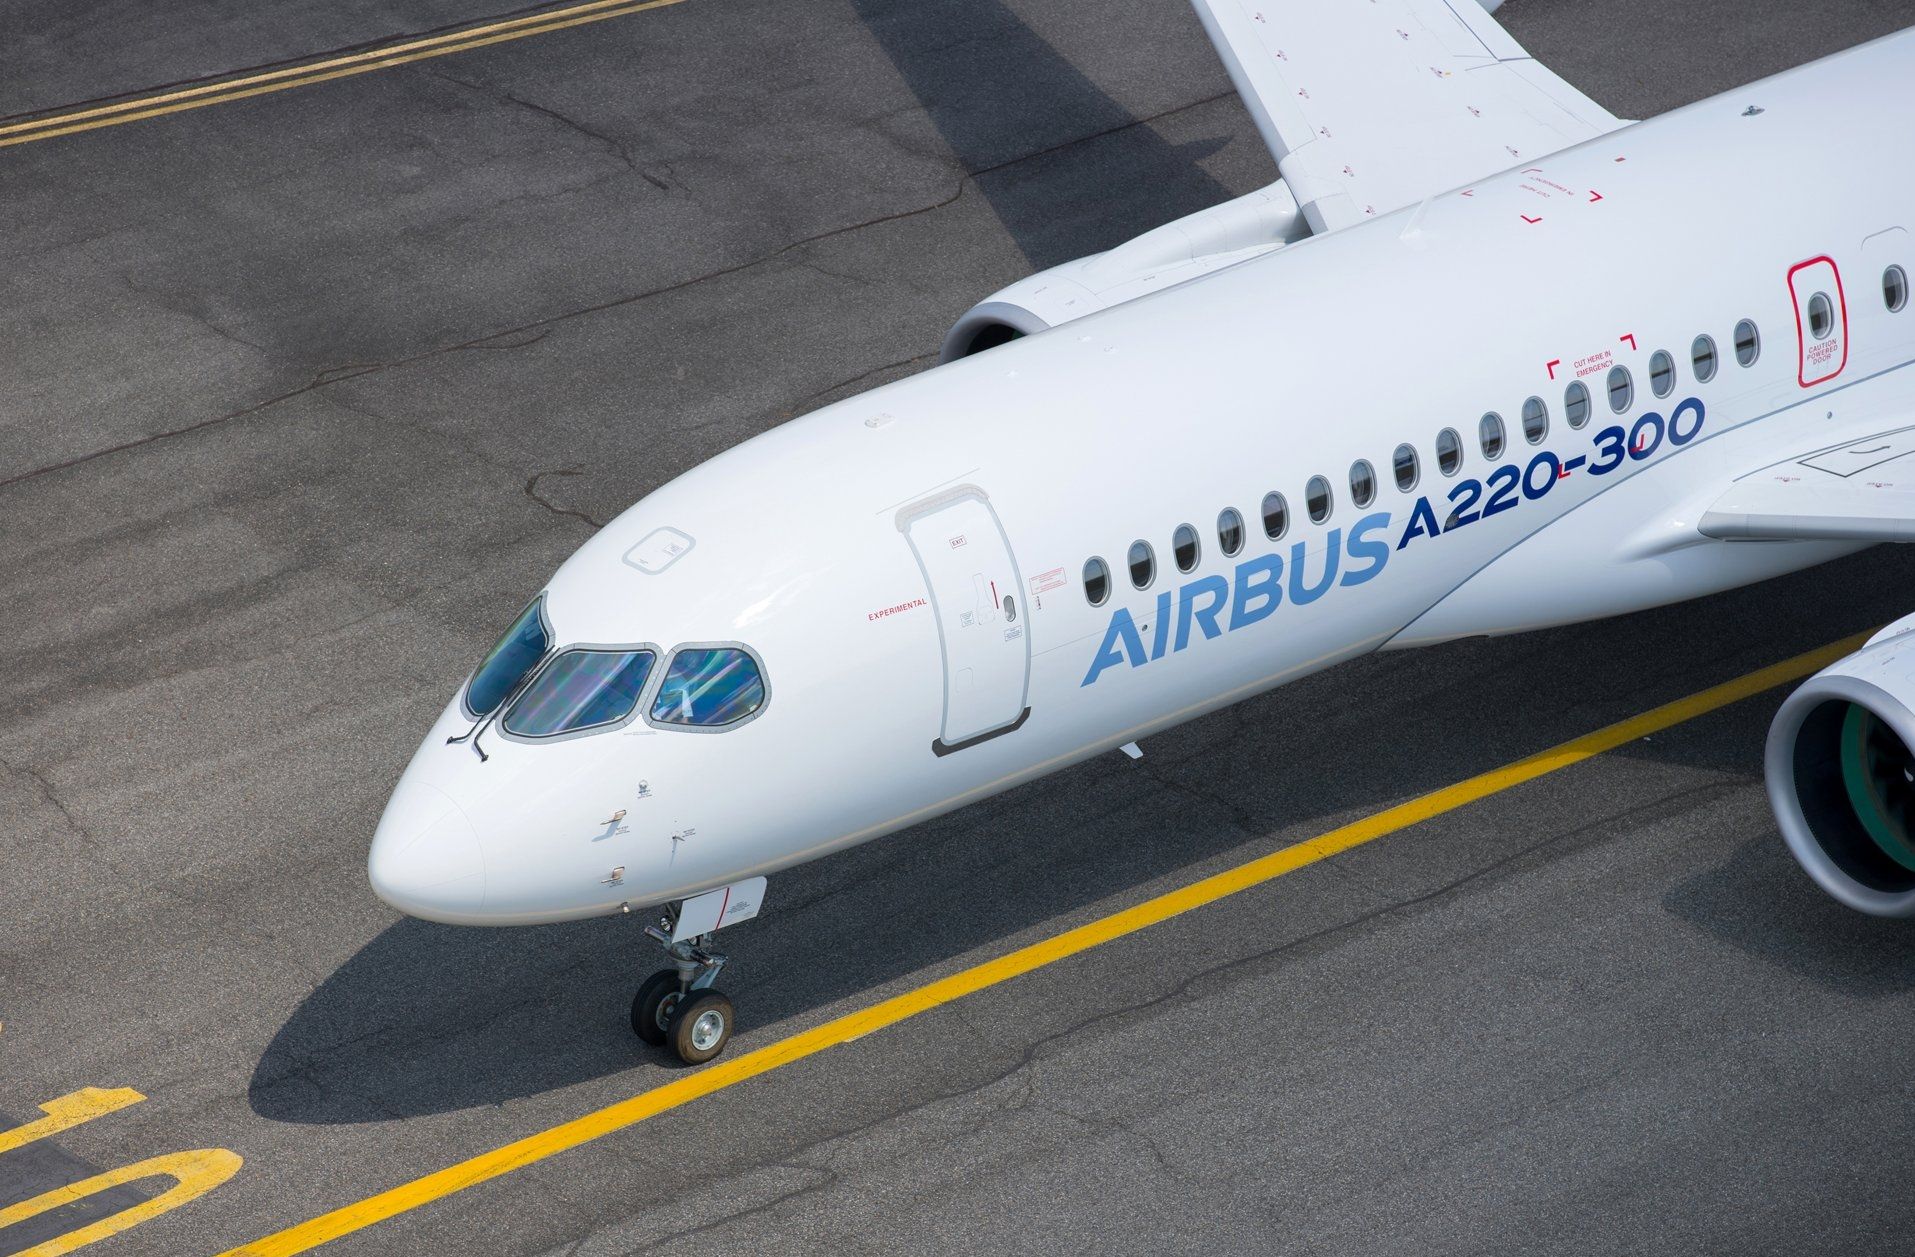 Airbus-A220-300-new-member-of-the-airbus-single-aisle-family-landing-029